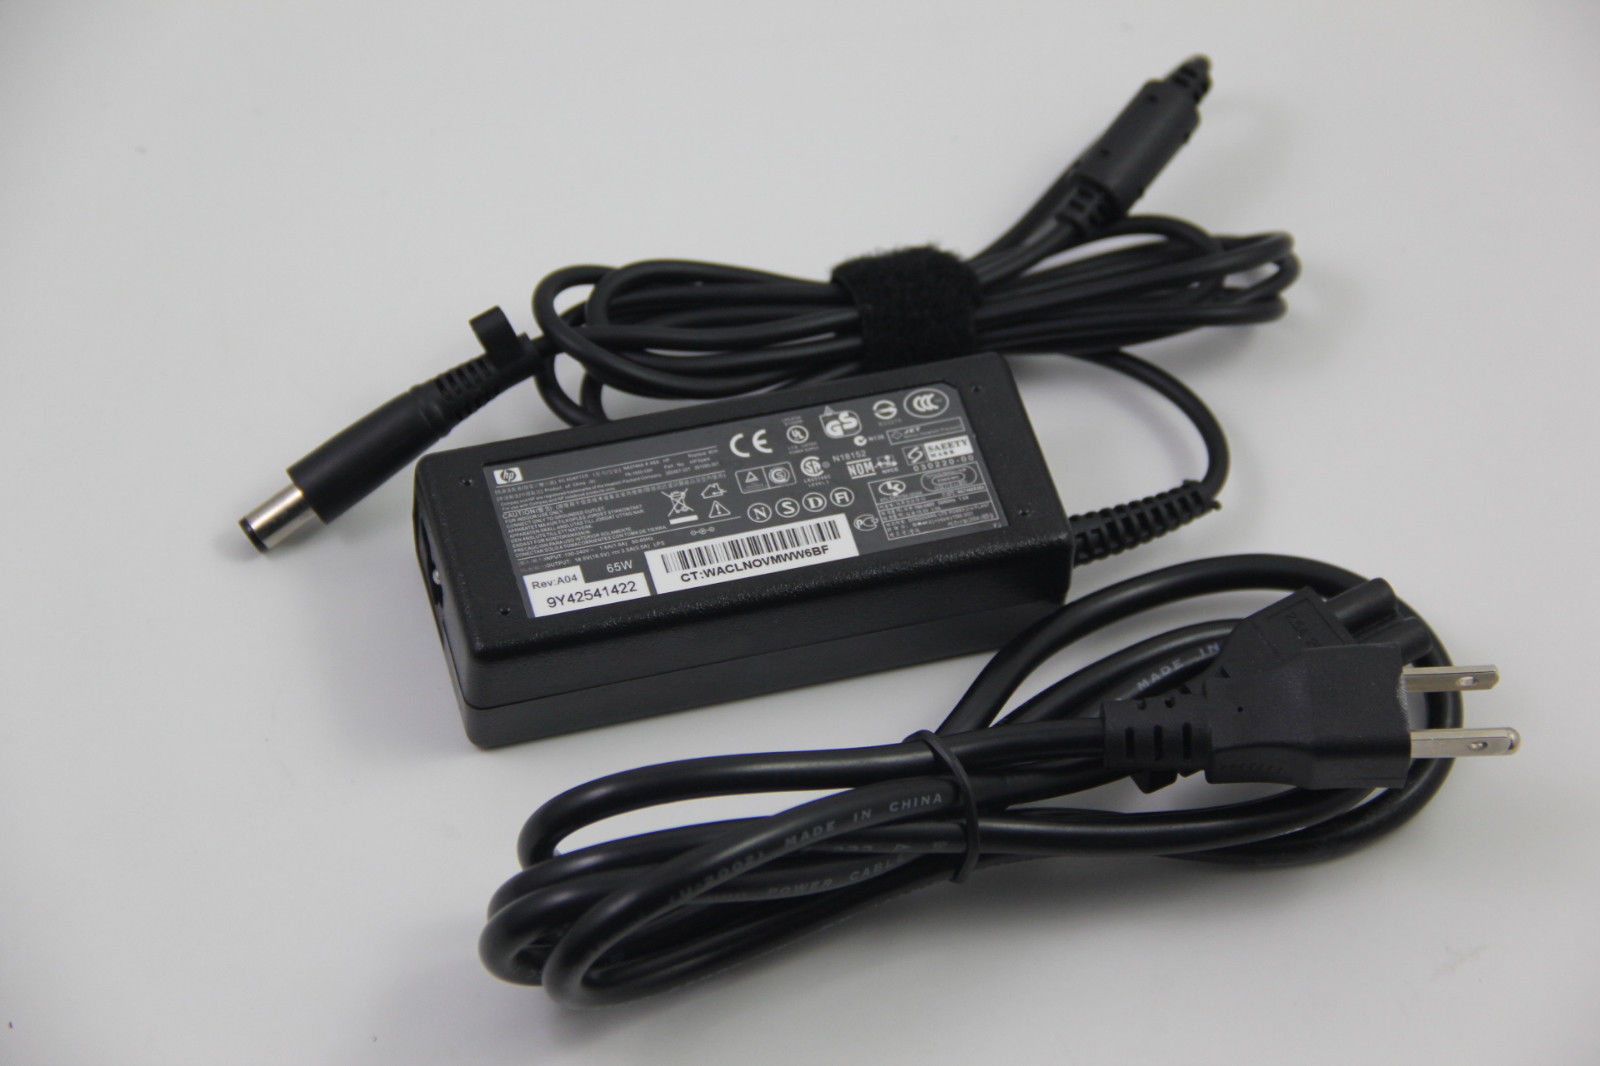 65W OEM Genuine AC Adapter Charger For HP Pavilion 463958-001 G50 G60 NC6320 New